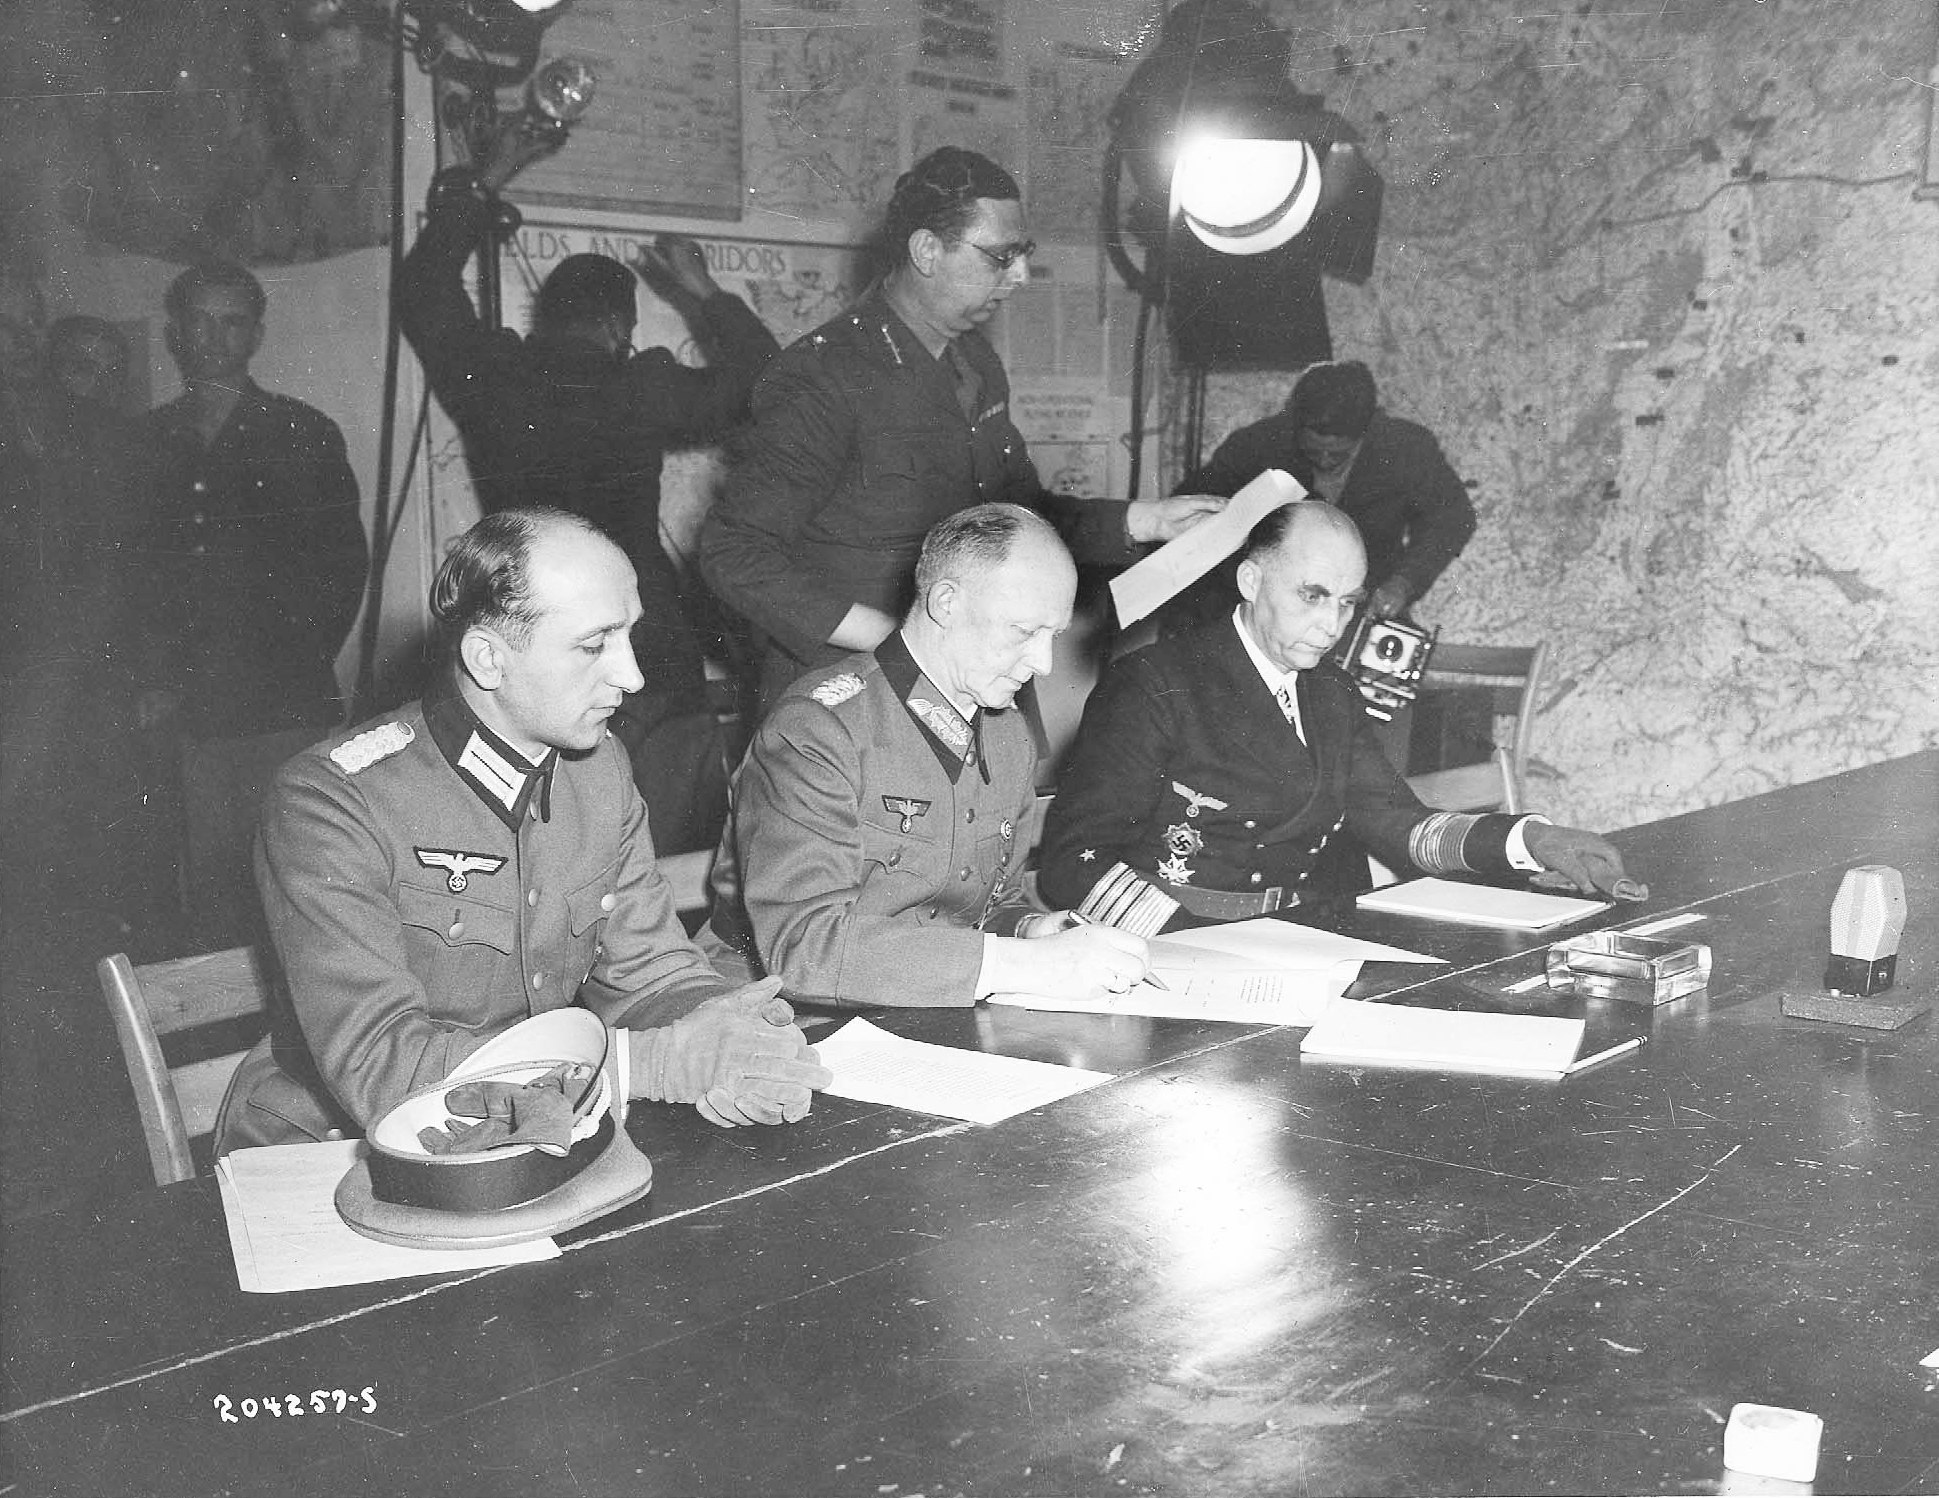 Jodl signing surrender documents at Eisenhower's headquarters, flanked by Major Wilhelm Oxenius and Admiral Hans-Georg von Friedeburg, Reims, France, 7 May 1945, photo 4 of 4